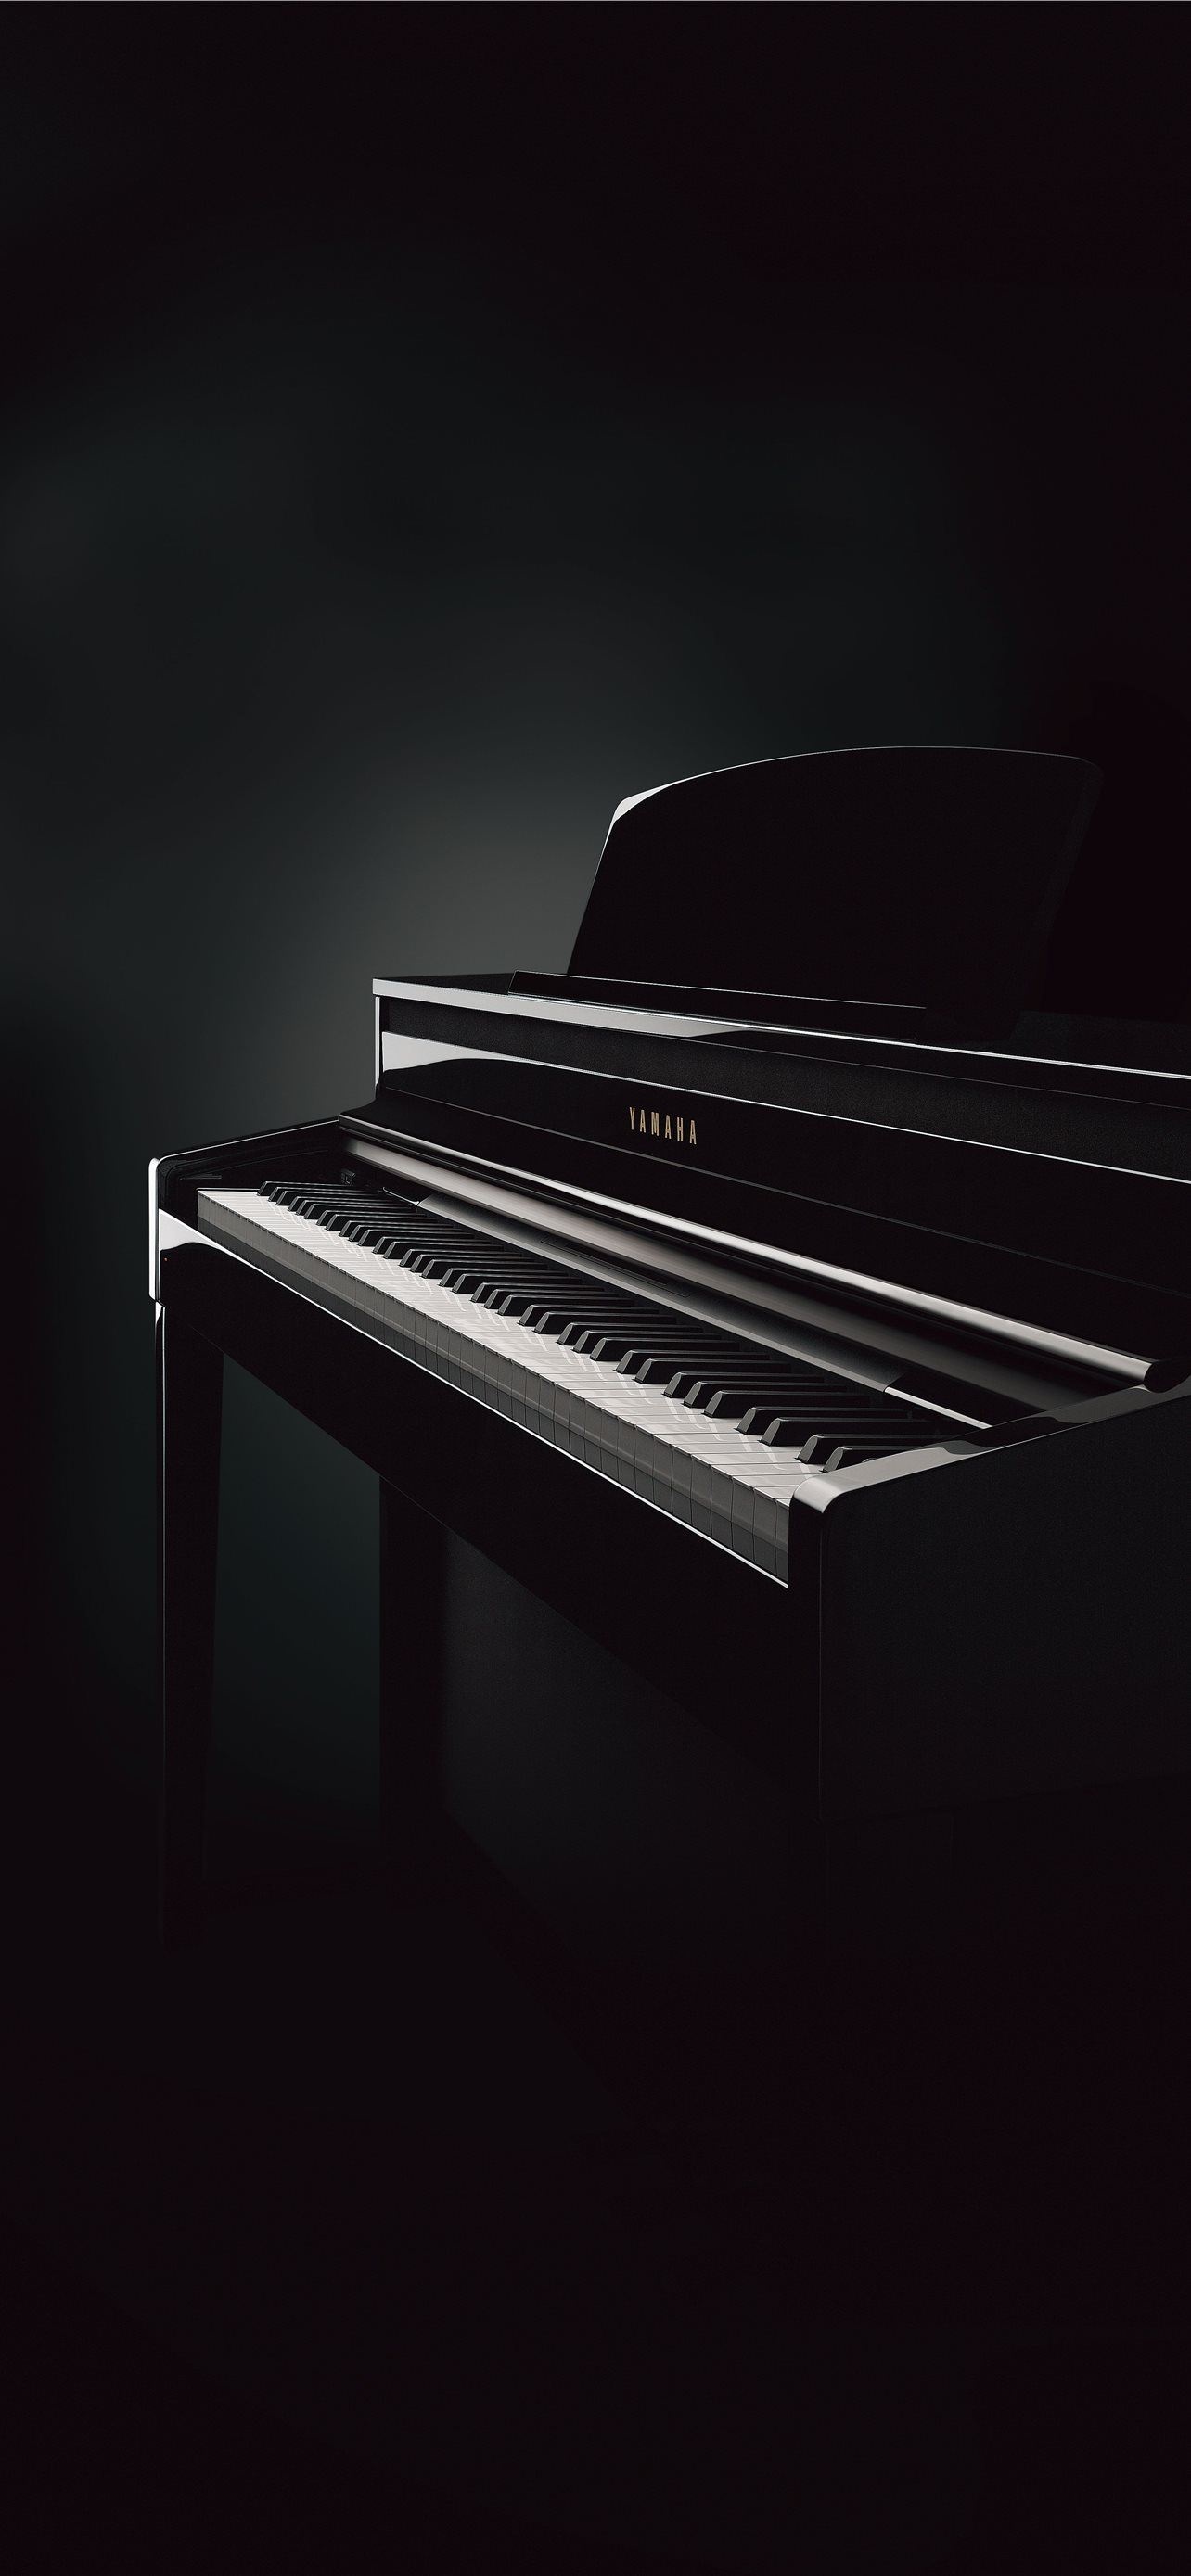 Grand Piano: An instrument, having the strings strung in a horizontal harp-shaped frame, Minimalistic. 1290x2780 HD Wallpaper.